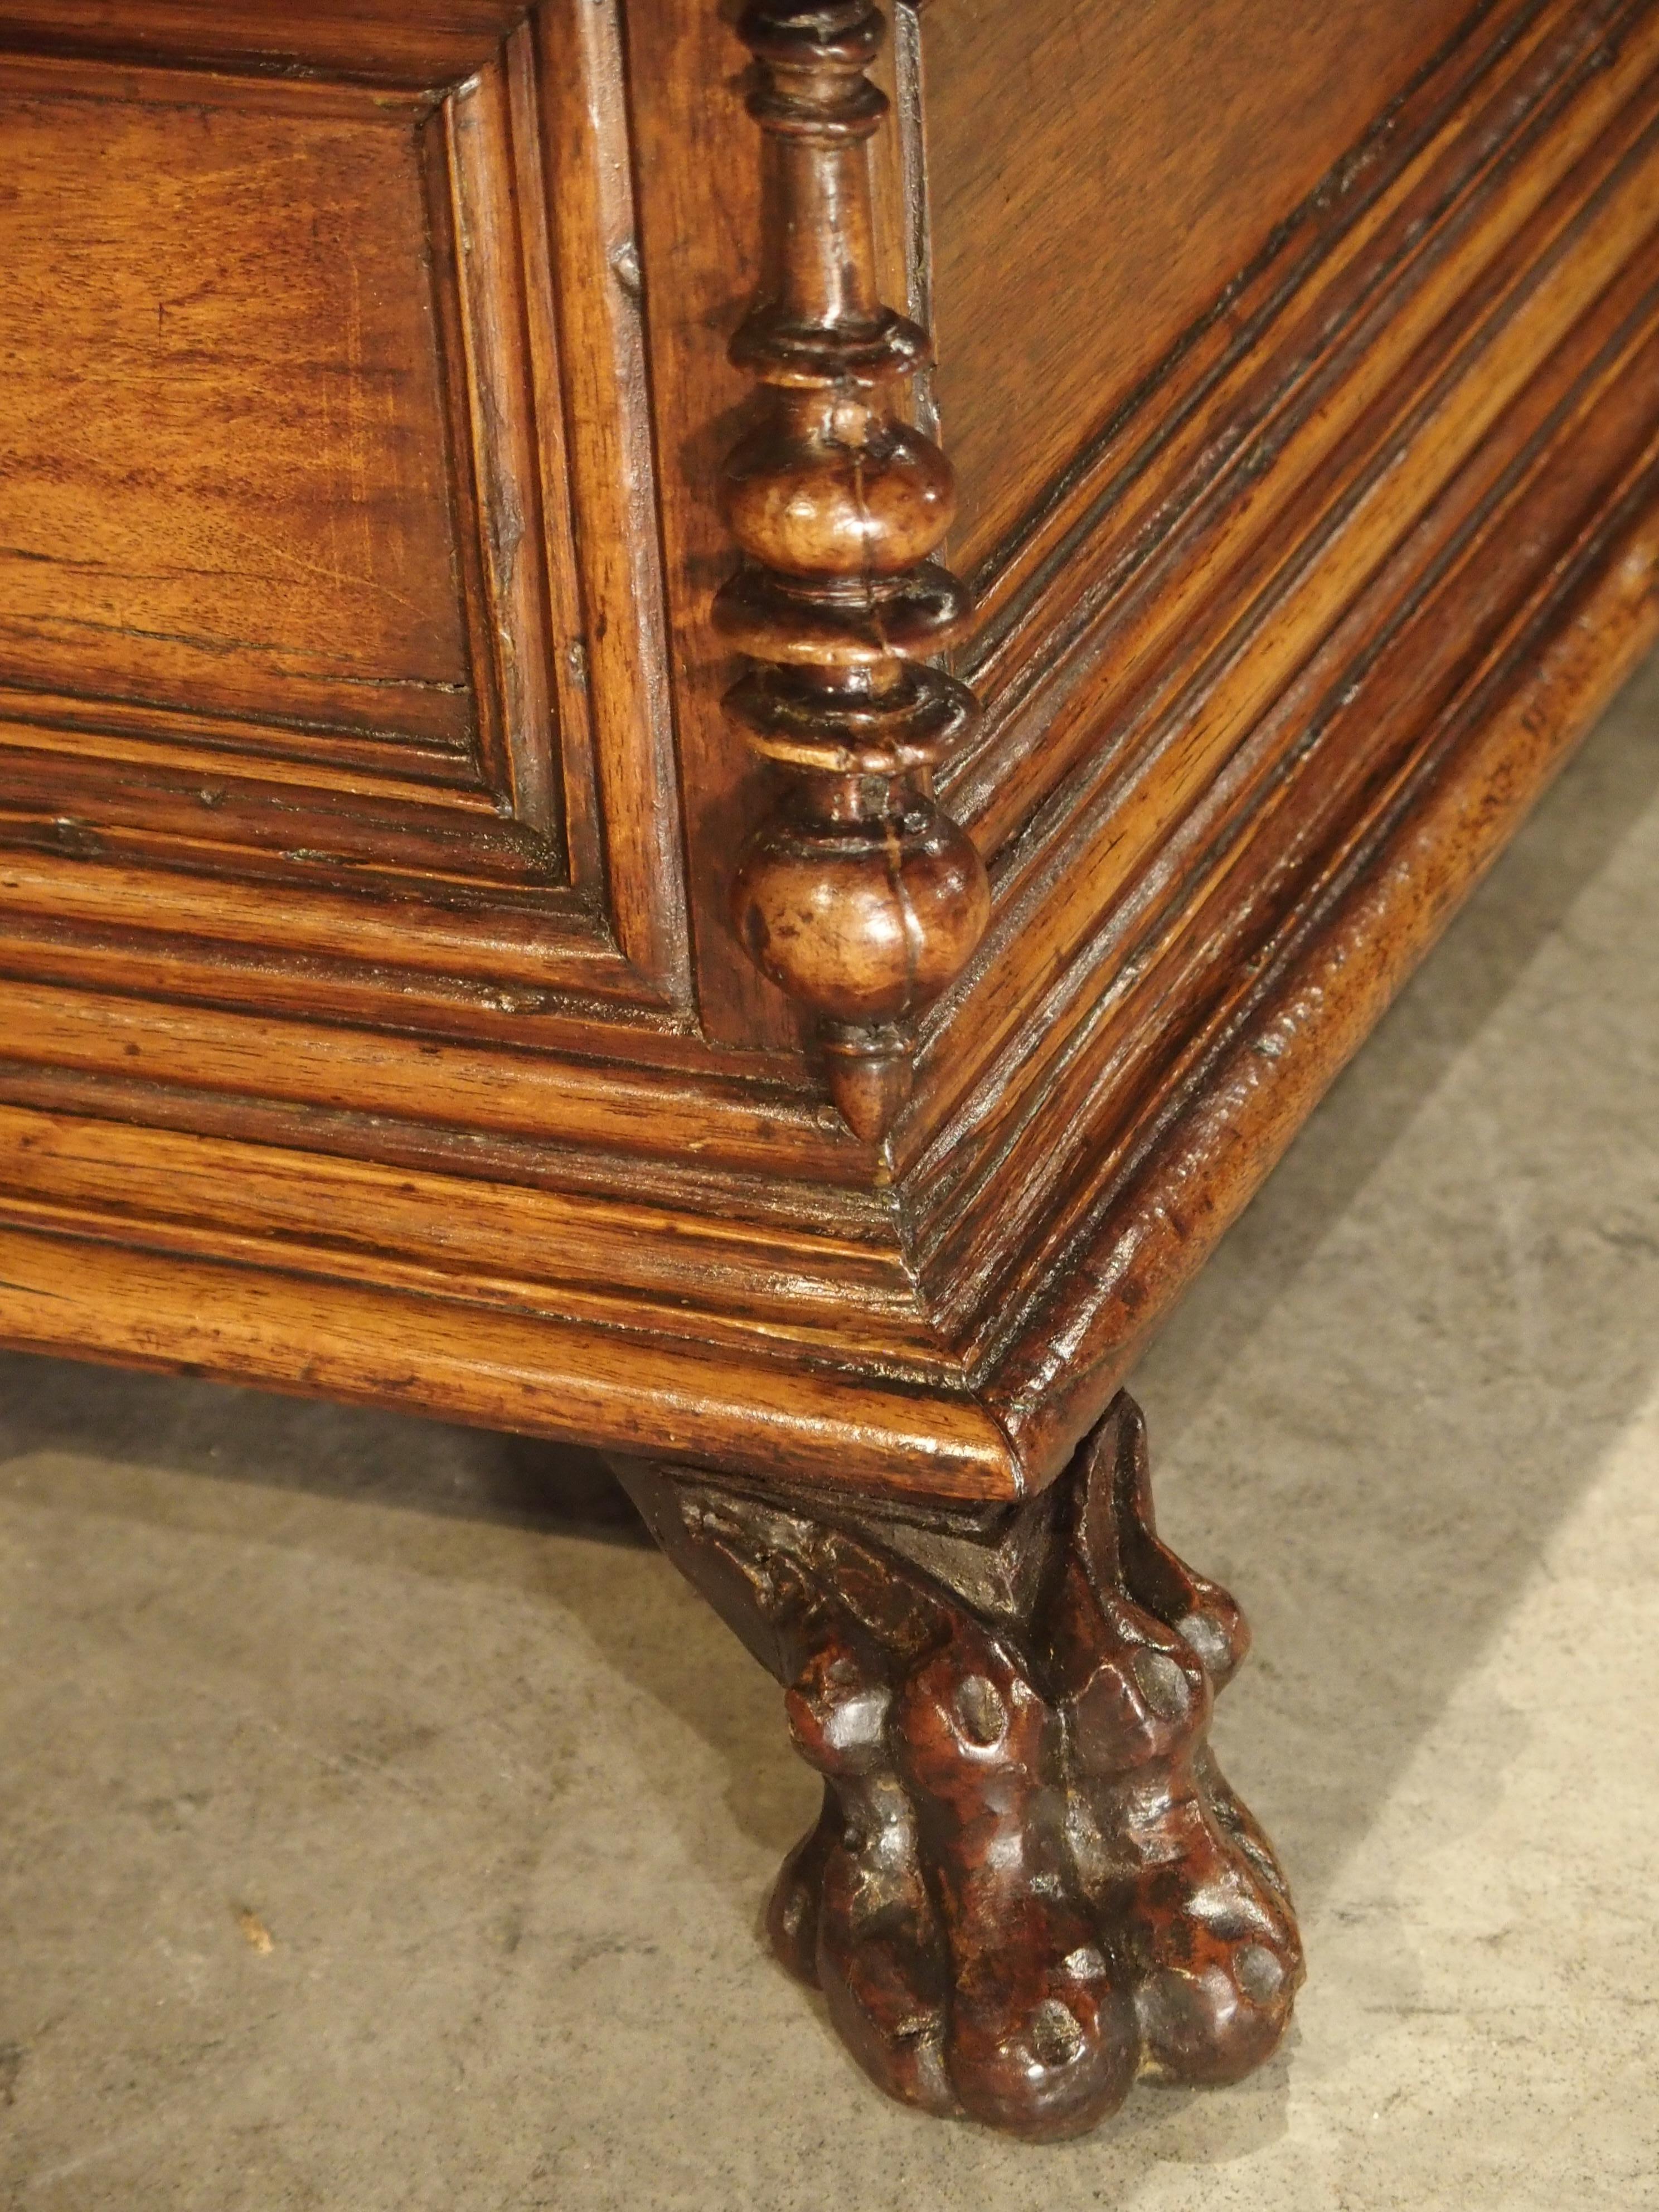 This small tabletop trunk has been made with walnut wood and comes from Northern Italy. Its stepped out panelled front add depth to an otherwise simple and clean frontage. There are two turned motifs at either side which are slightly different from